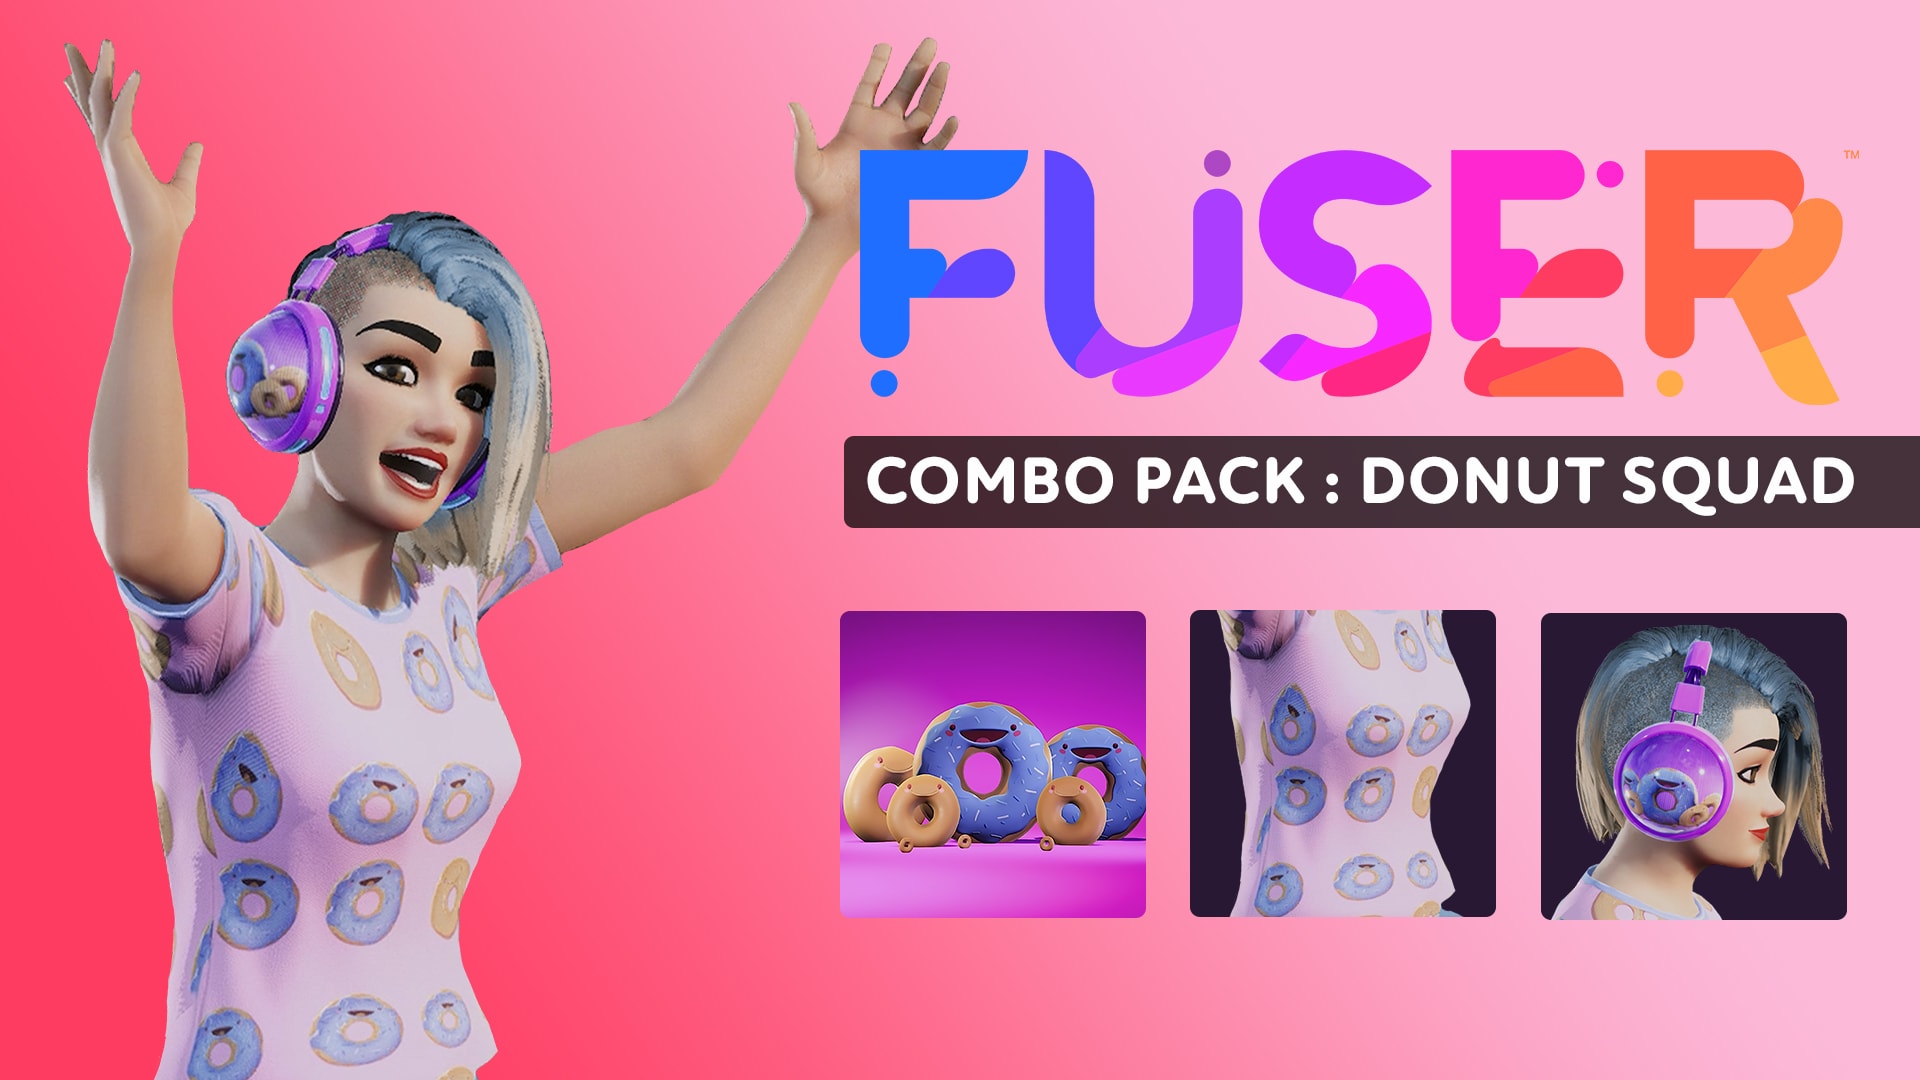 Combo Pack: Donut Squad